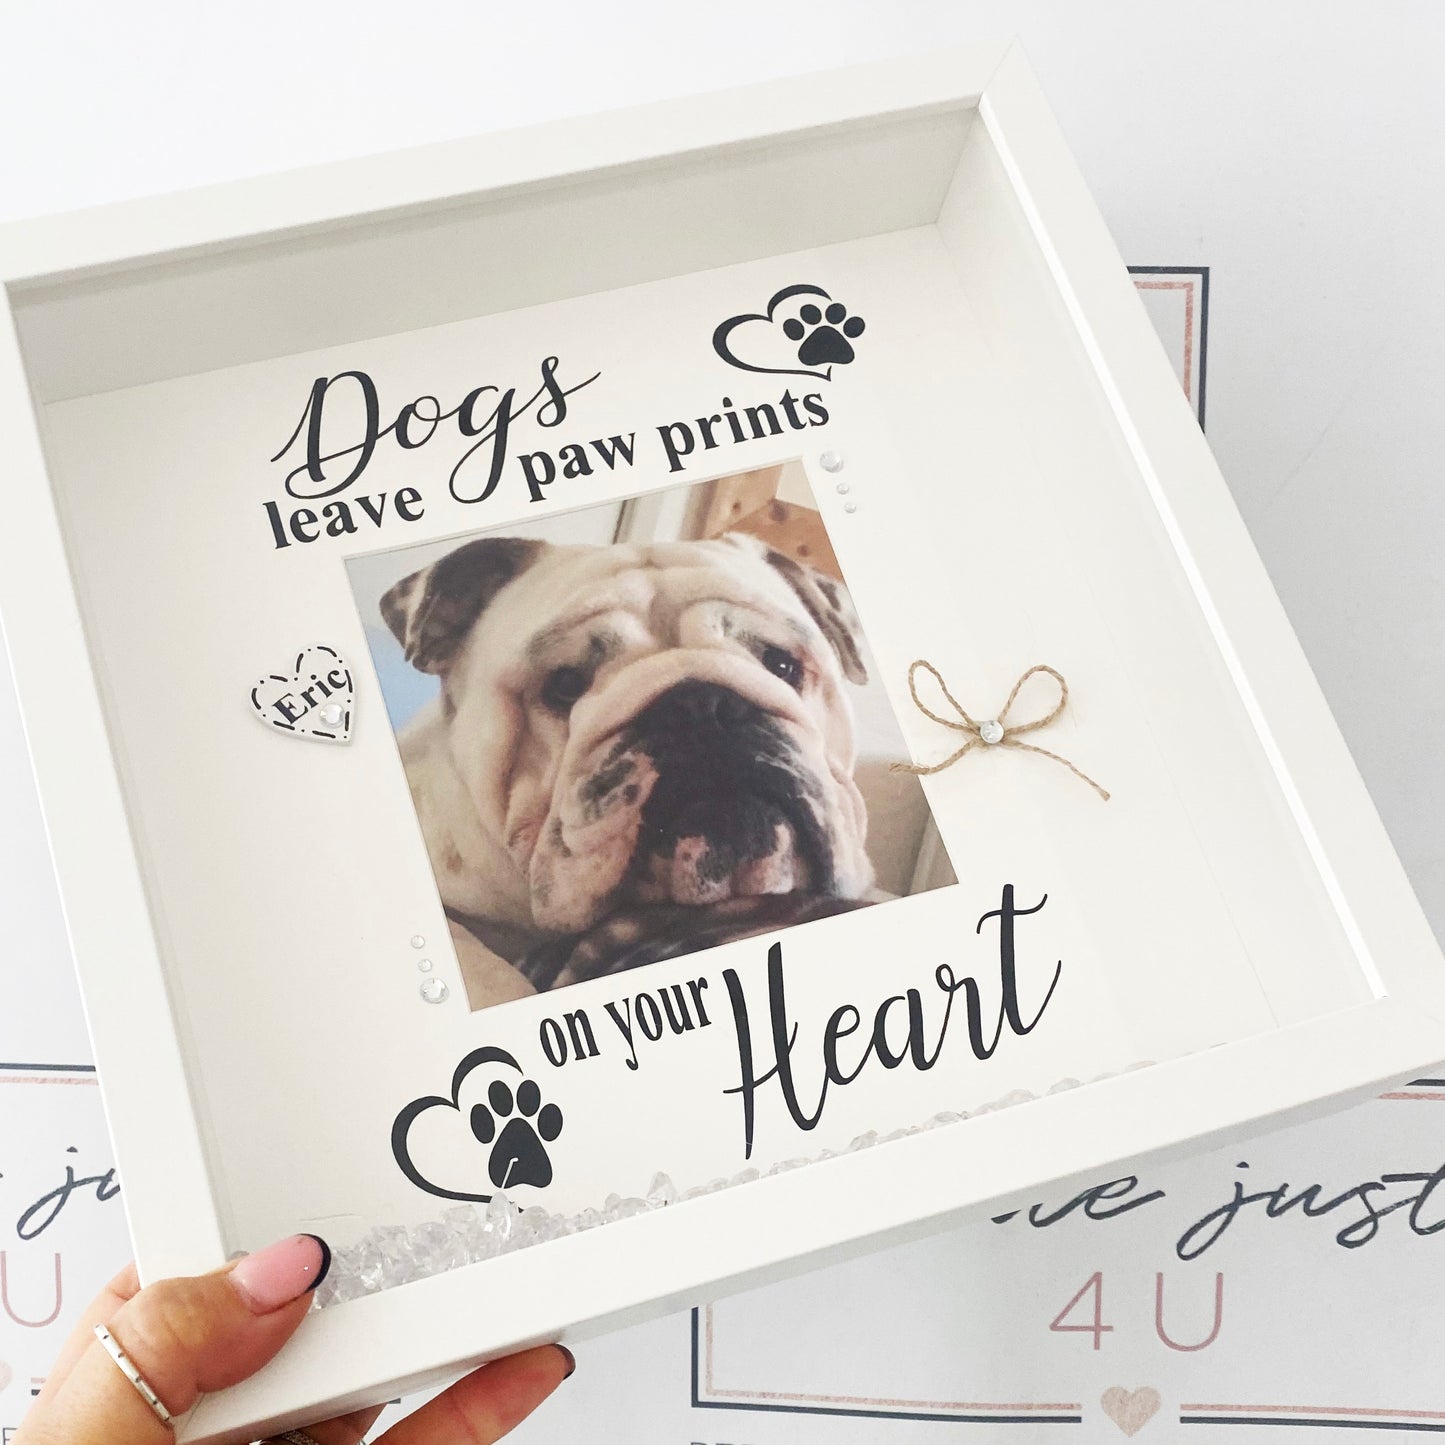 Dog Memorial Frame - Dogs Leave Paw Prints on your heart